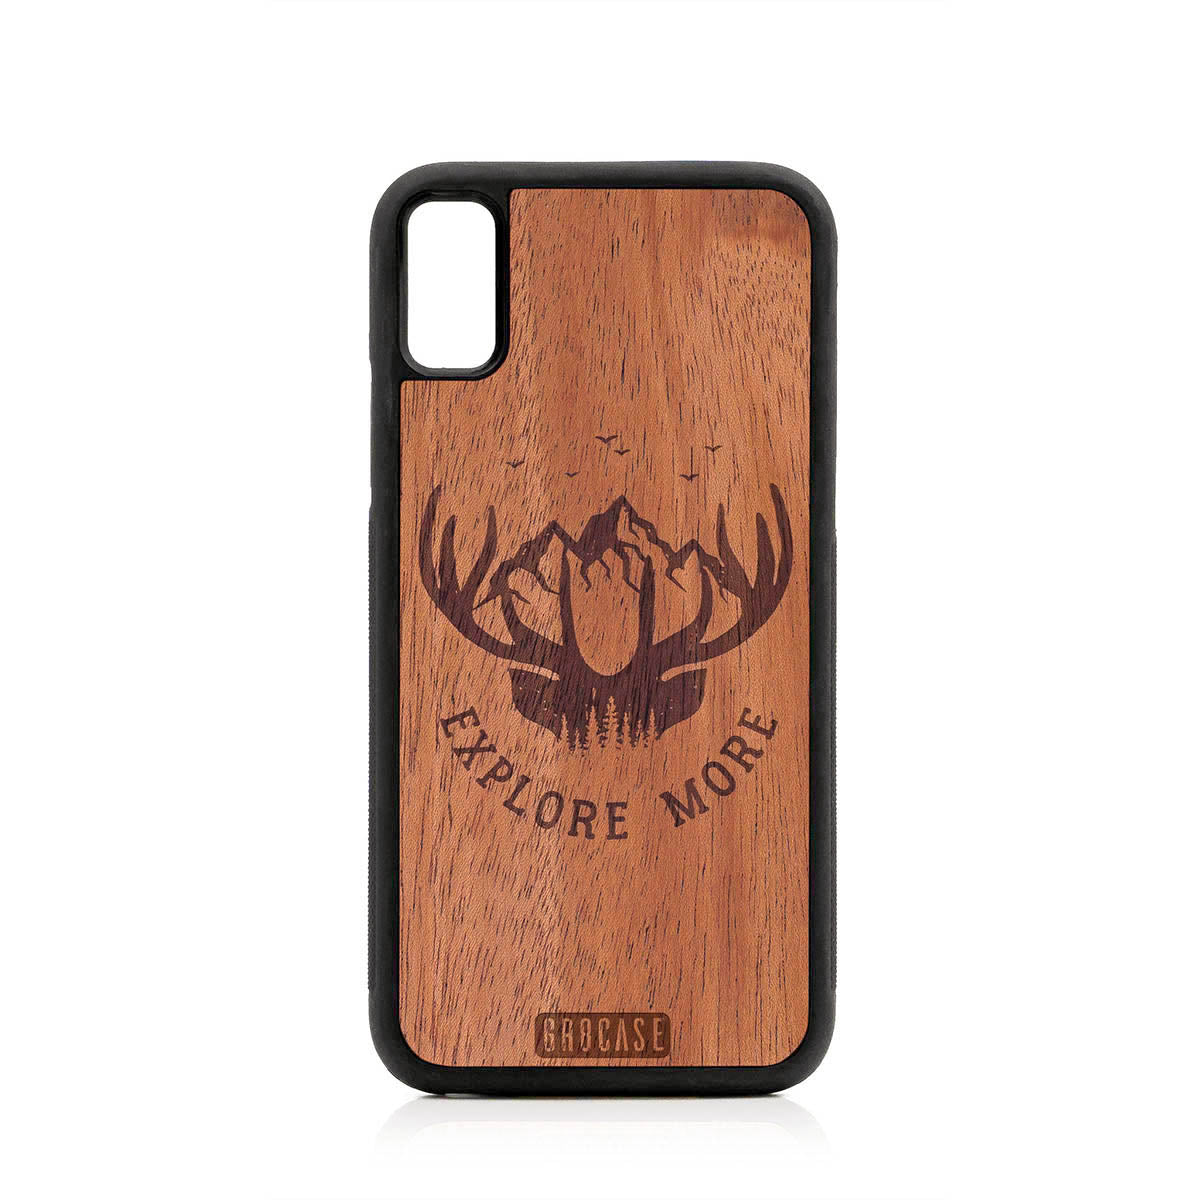 Explore More (Forest, Mountains & Antlers) Design Wood Case For iPhone XR by GR8CASE